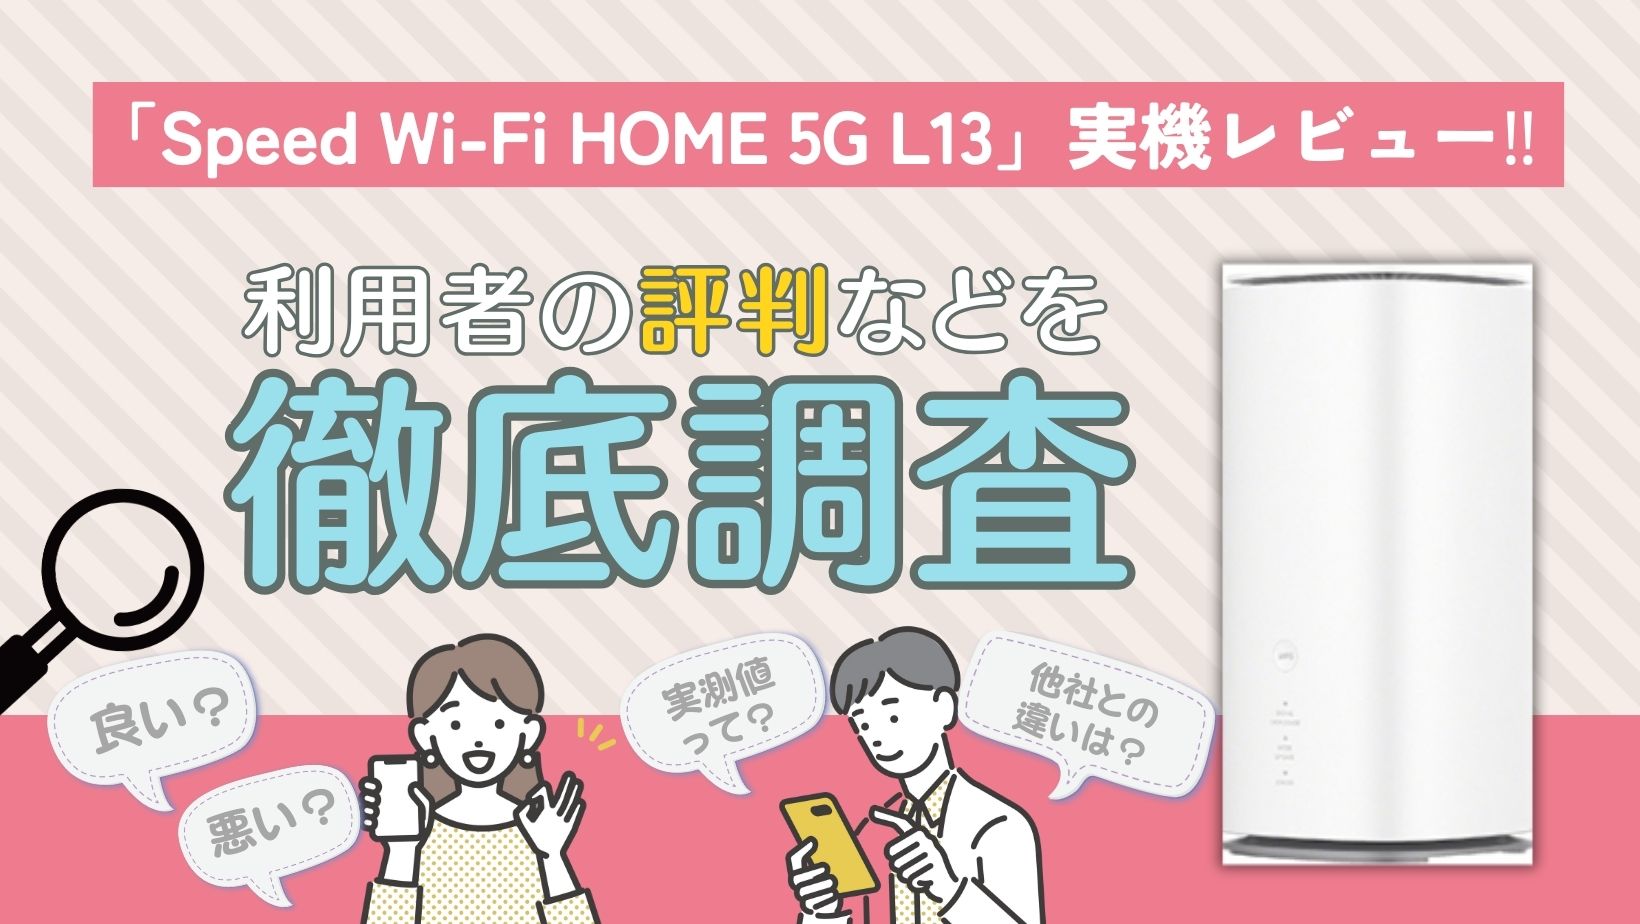 Speed Wi-Fi HOME 5G L13の実機レビュー！速度はどれくらい？価格や